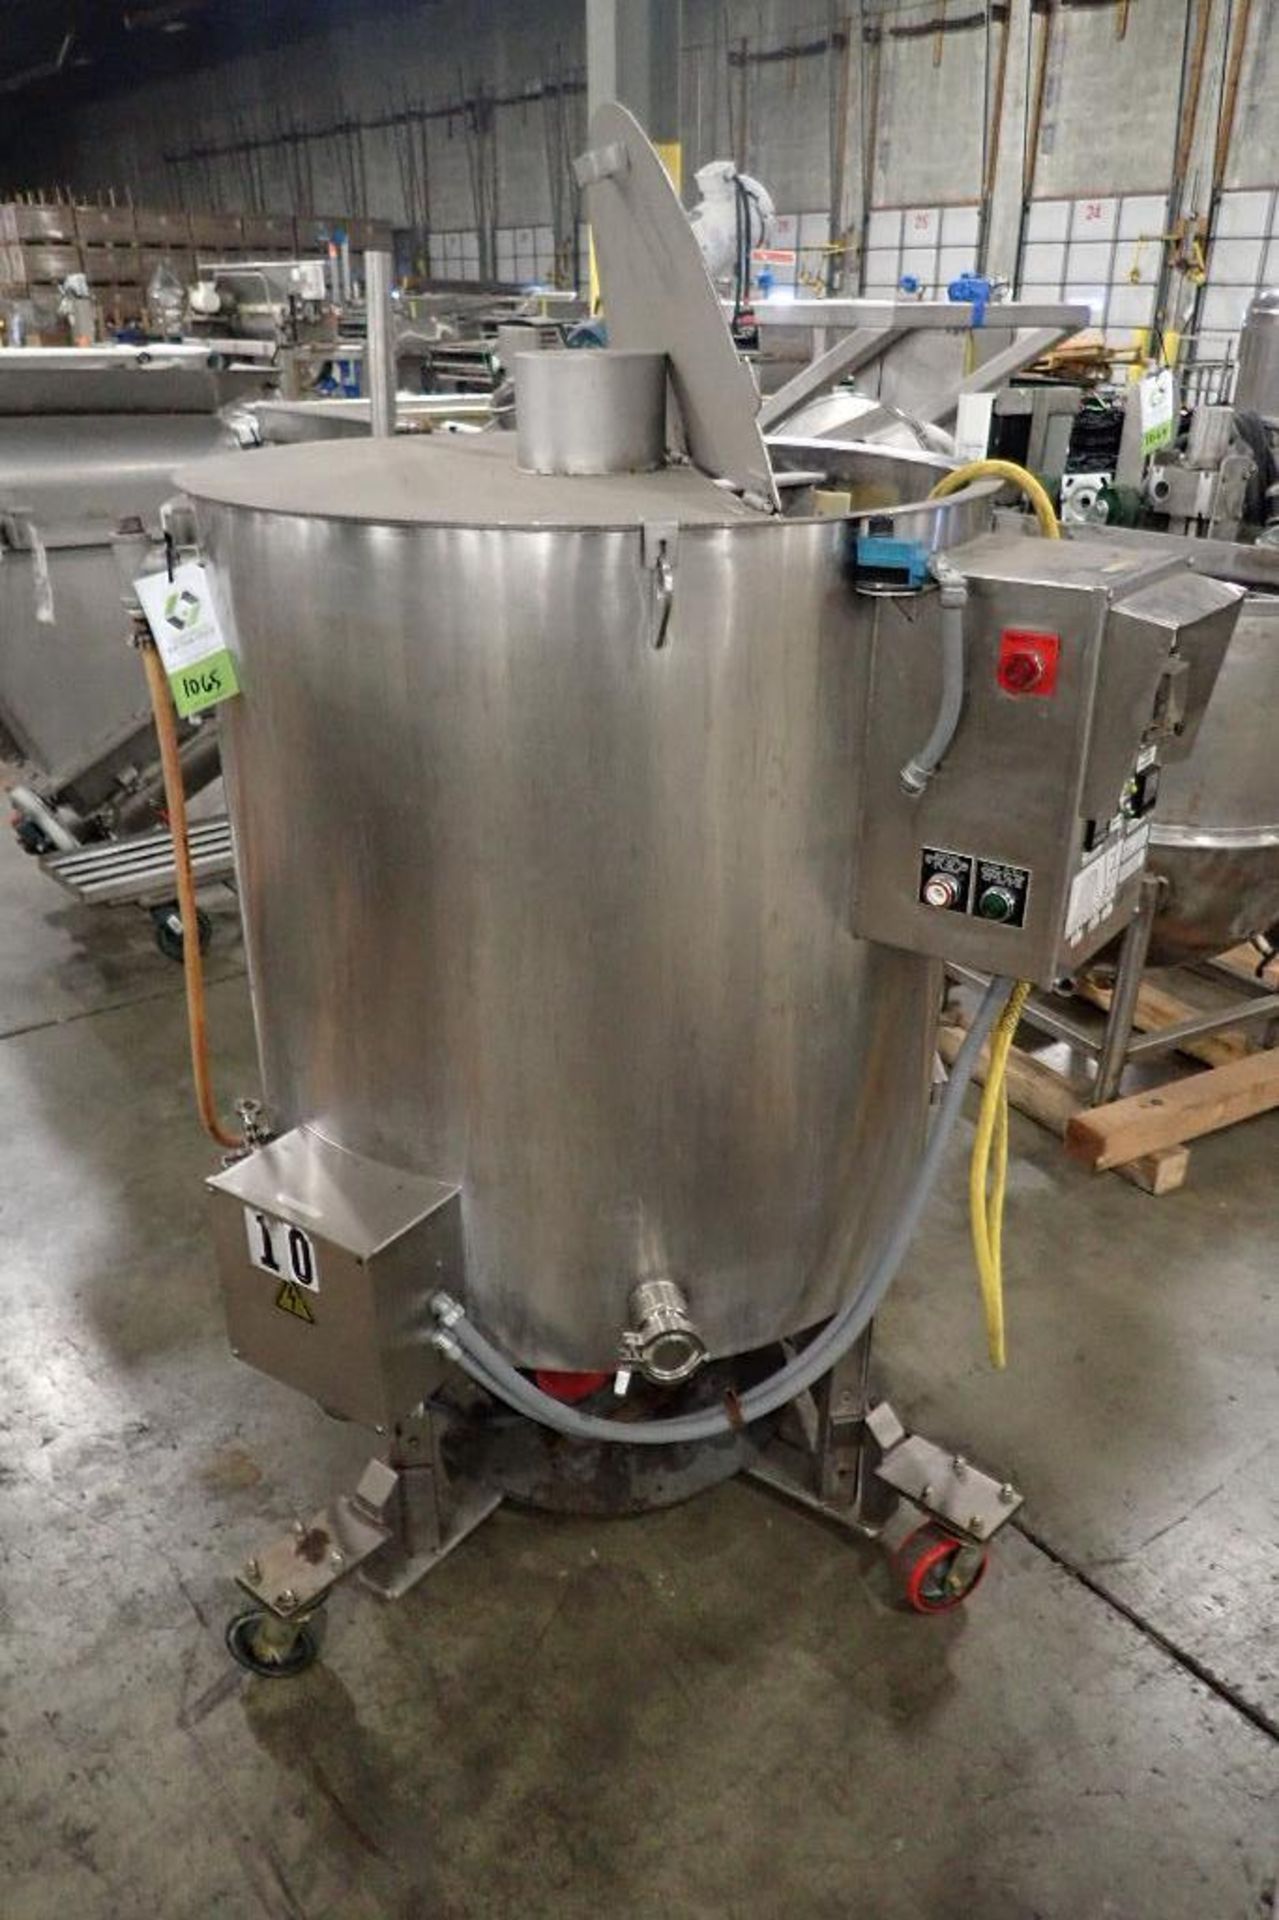 2004 Savage SS jacketed chocolate melt tank, Model 0974-60, SN 159, water jacket, 35 in. dia x 39 in